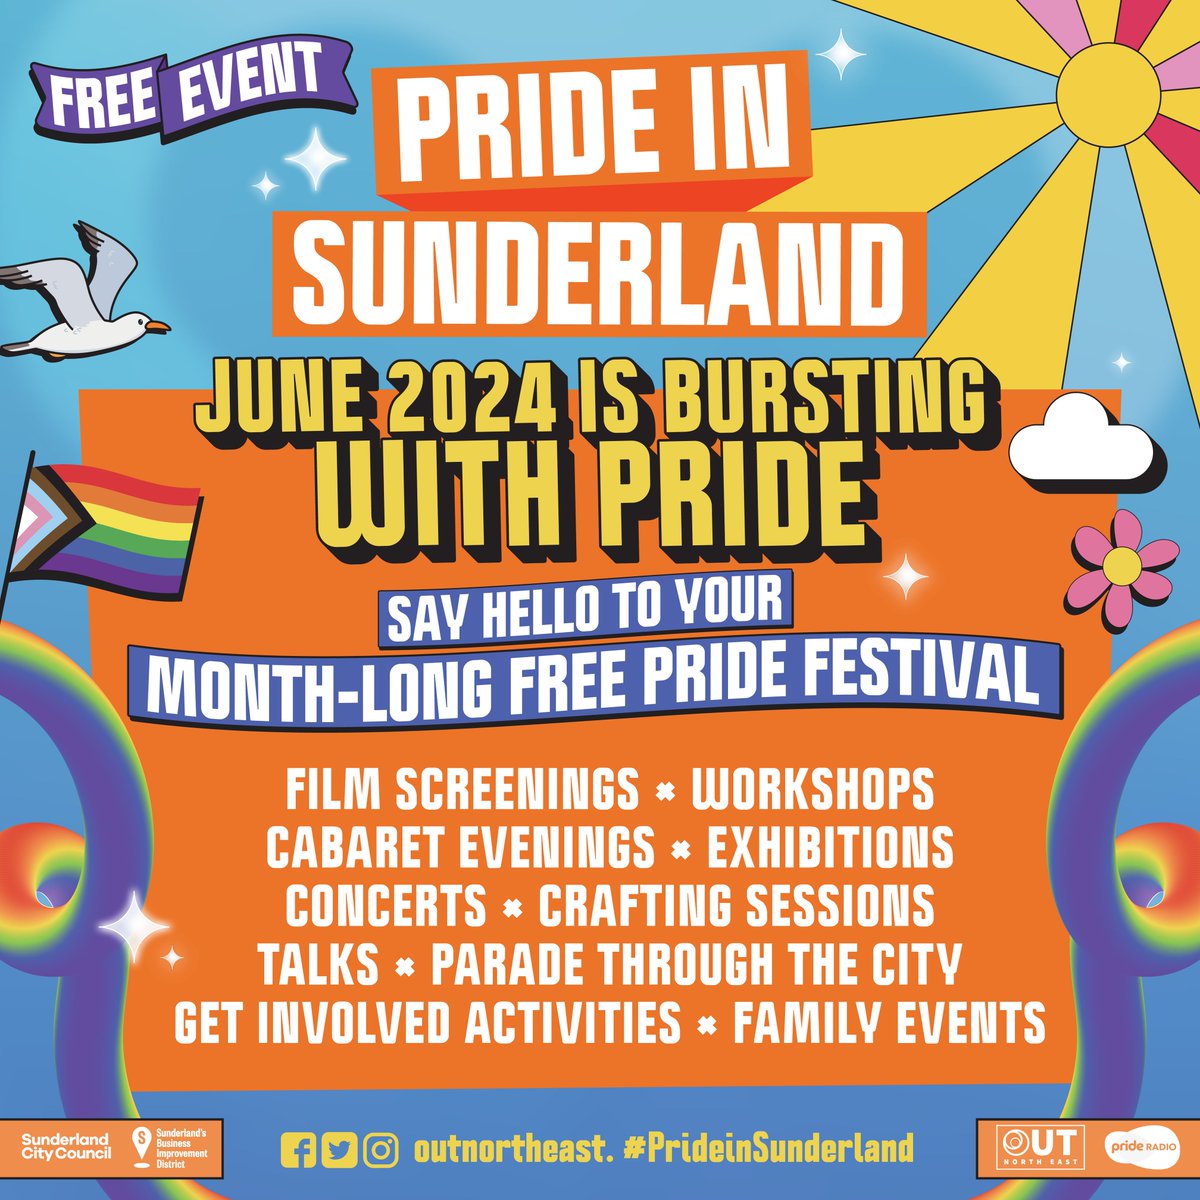 June 2024 is bursting with Pride! 🏳️‍🌈 A month-long free festival will see international music acts, film screenings, family events, a new side to a tv icon and an exhibition showcasing the Rainbow Flag as highlights of Sunderland's biggest ever Pride. orlo.uk/kPQGA